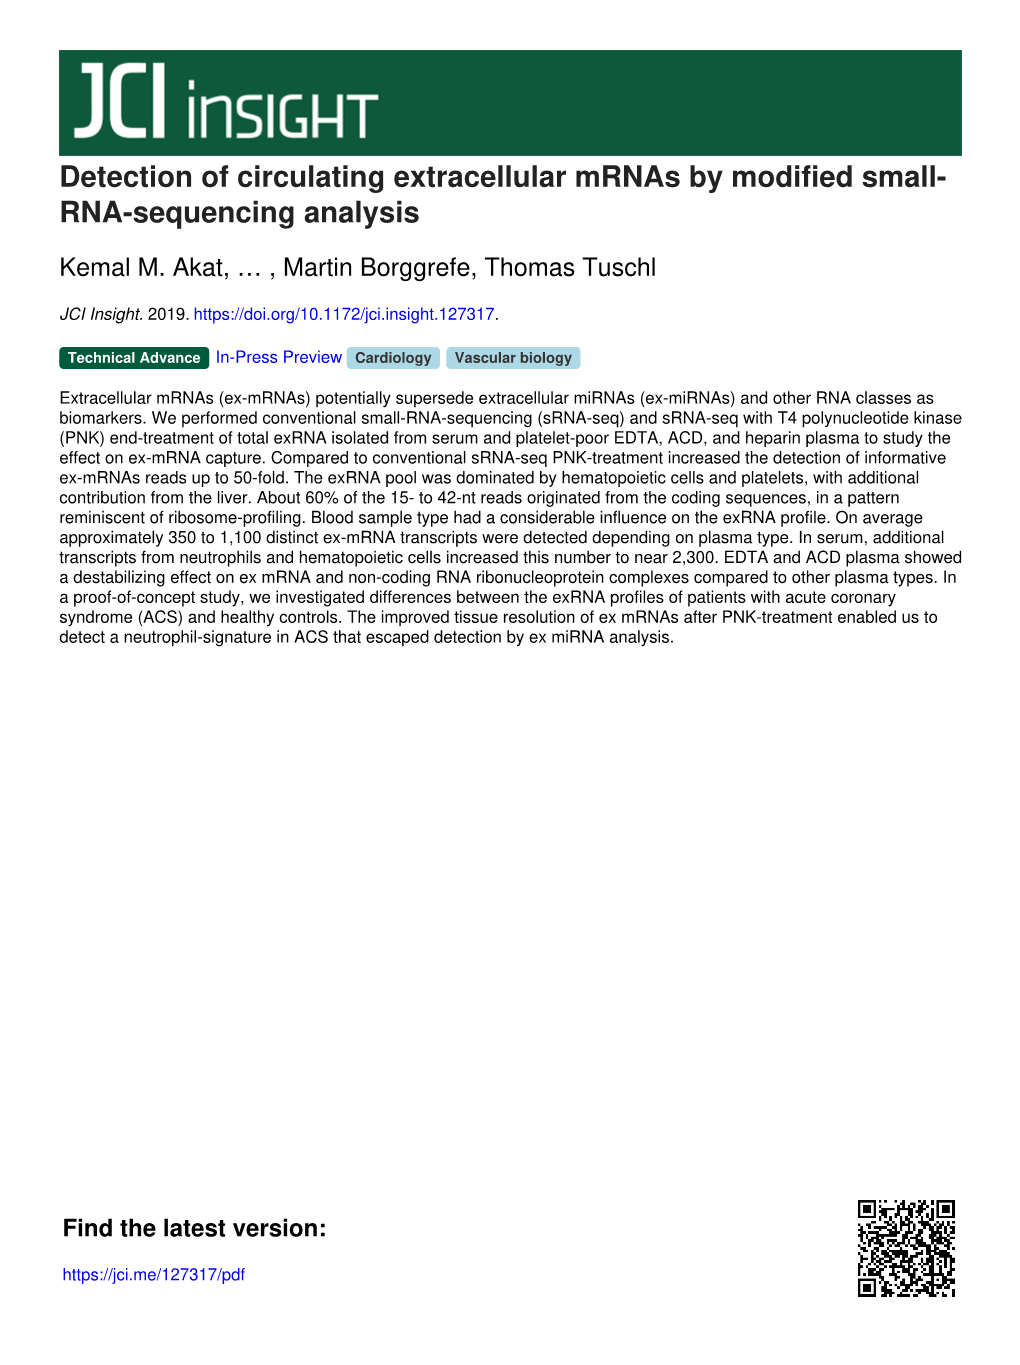 RNA-Sequencing Analysis